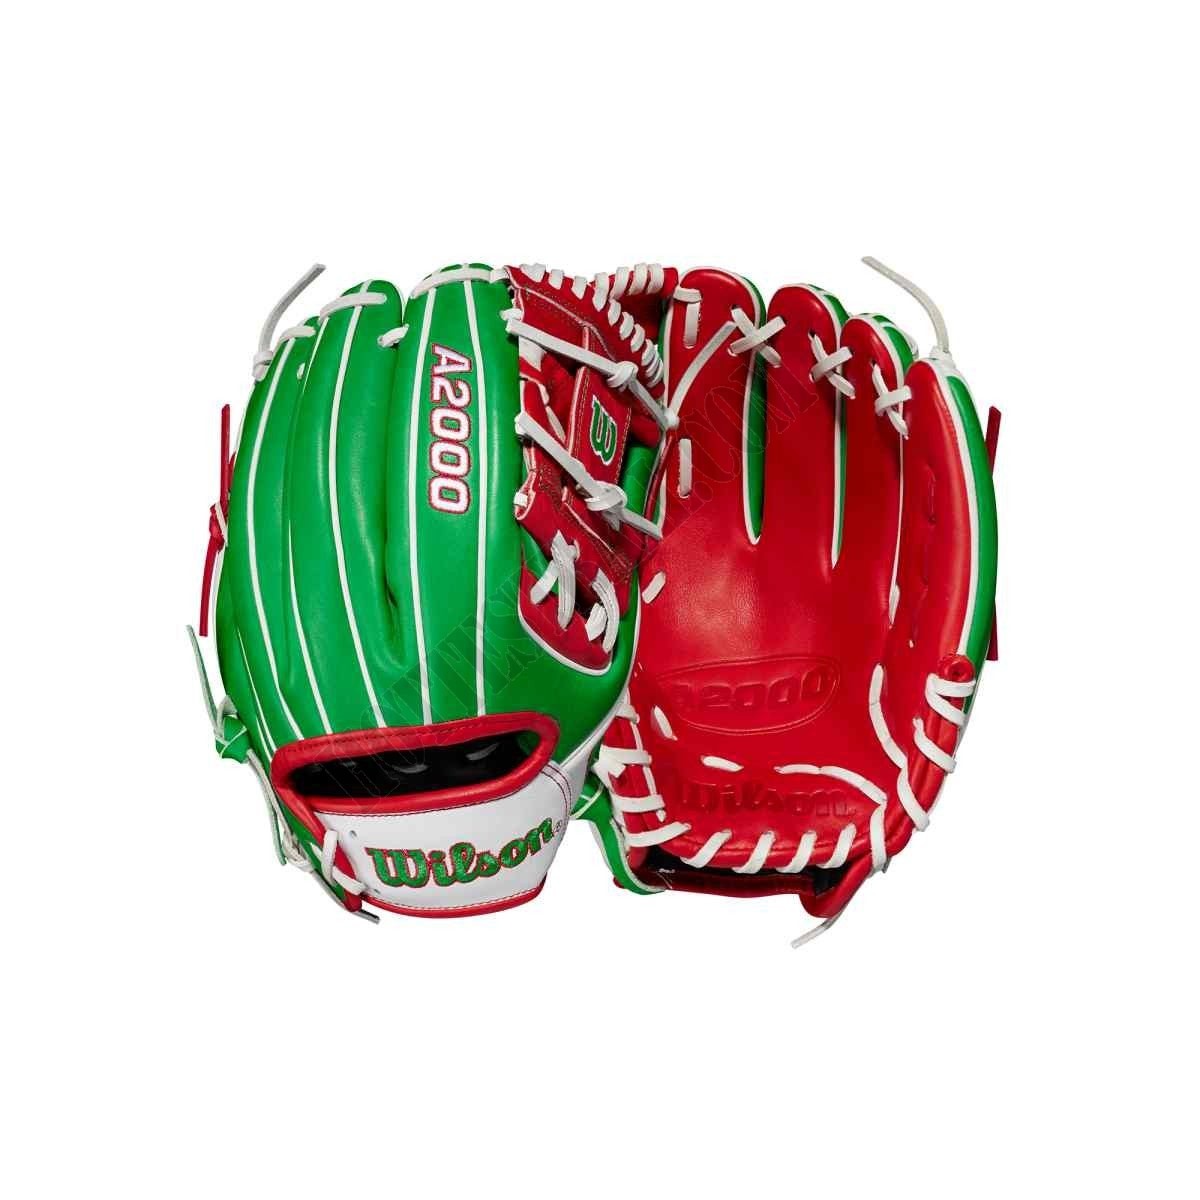 2021 A2000 1786 Mexico 11.5" Infield Baseball Glove - Limited Edition ● Wilson Promotions - 2021 A2000 1786 Mexico 11.5" Infield Baseball Glove - Limited Edition ● Wilson Promotions